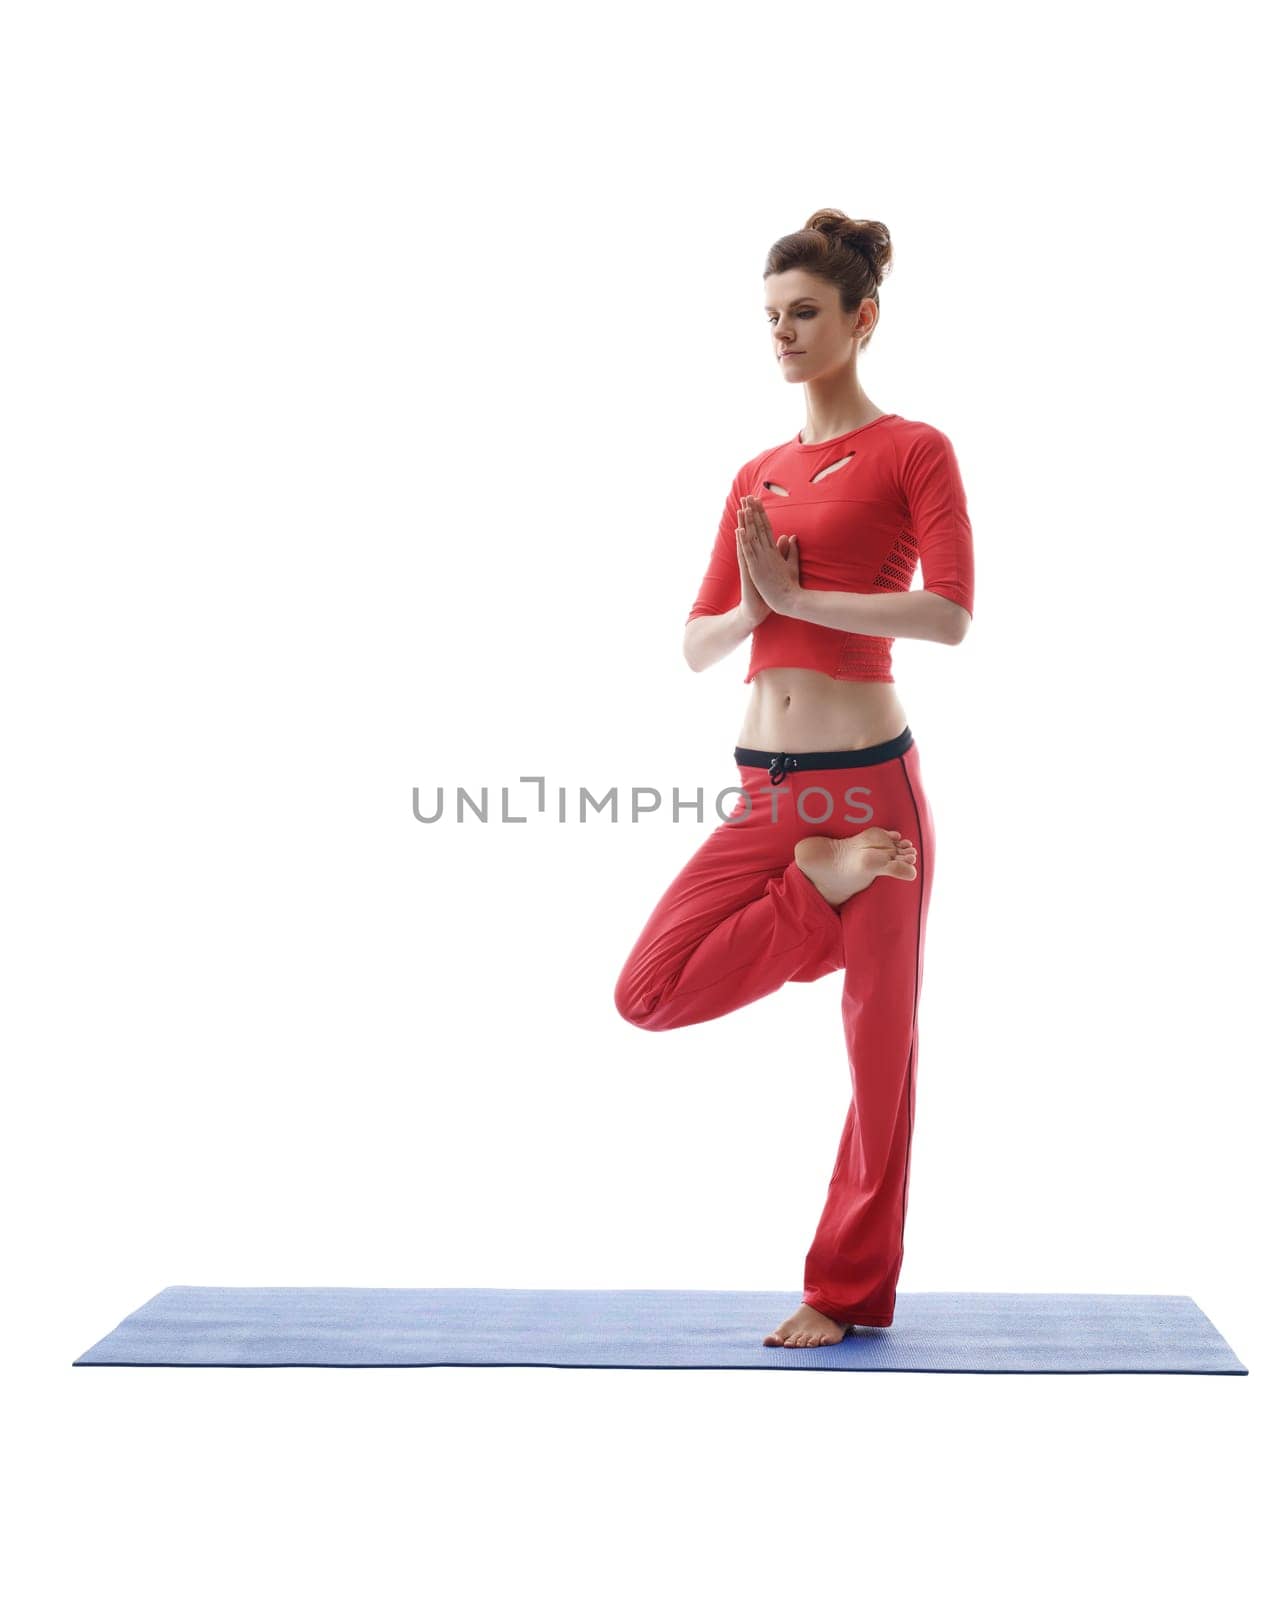 Image of yoga instructor posing while standing on one leg